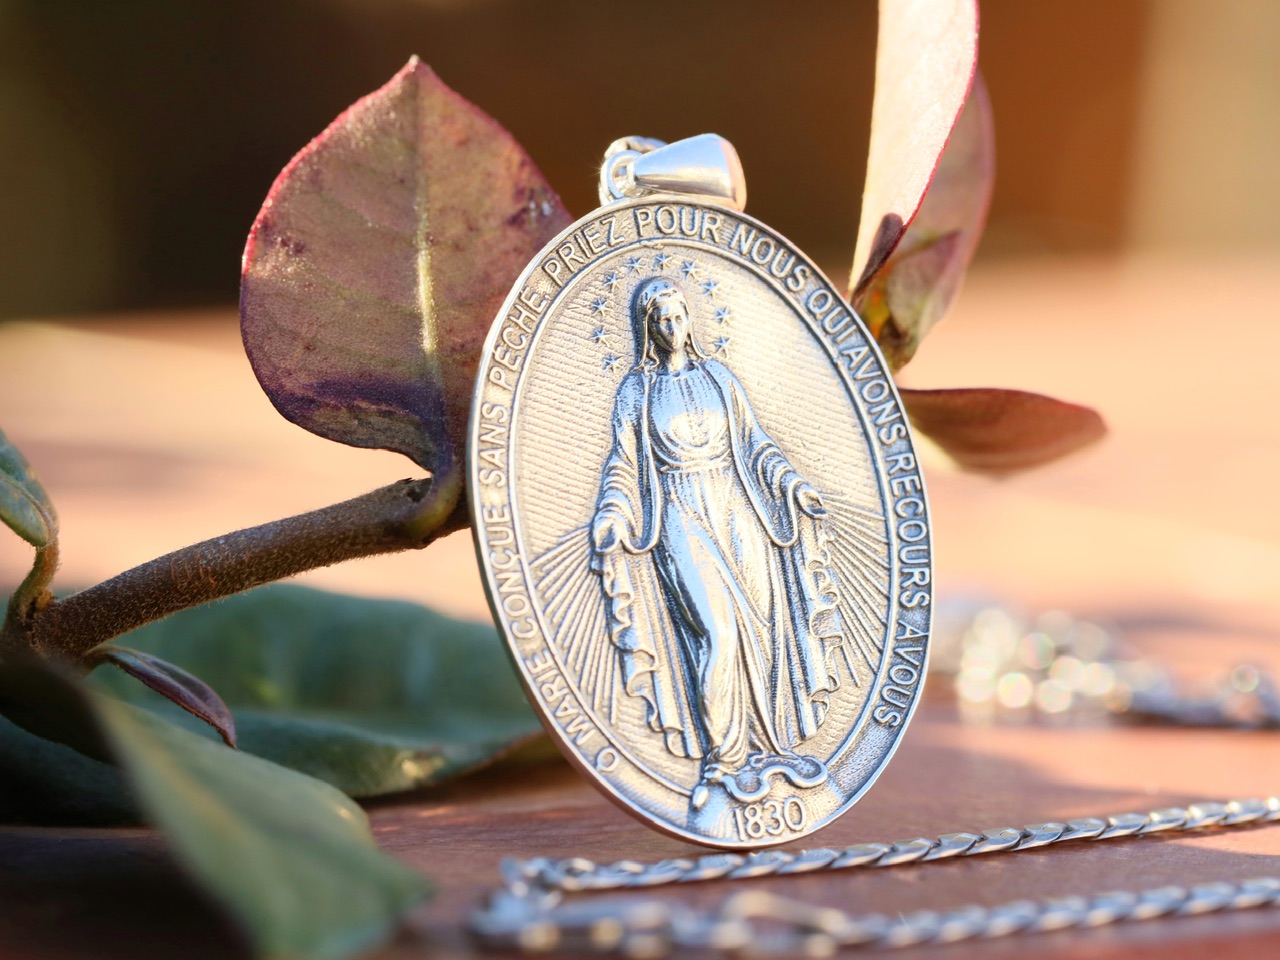 The Miraculous Medal, (1830)